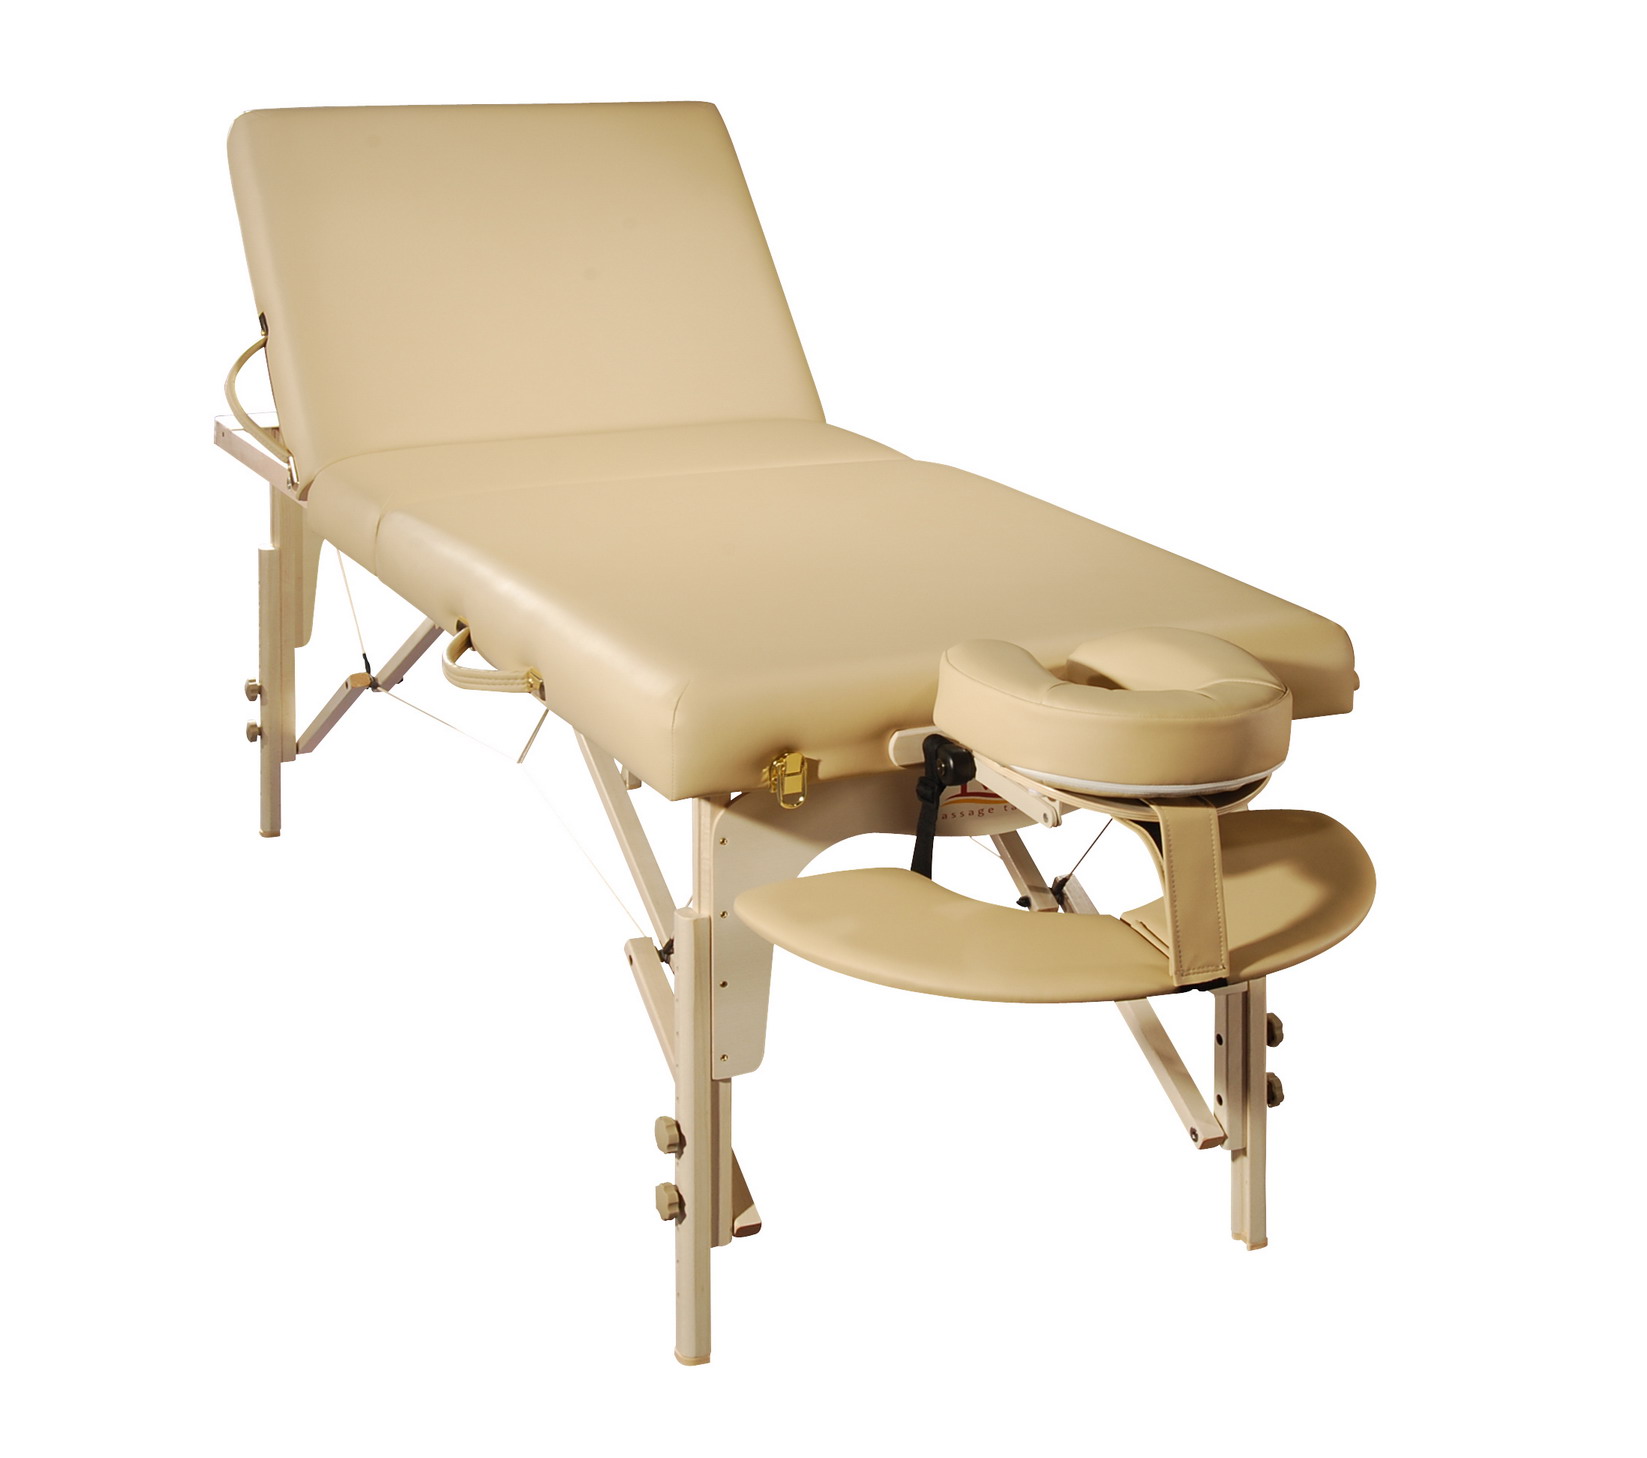 AITHEIN MASSAGE TABLE SPA MASSAGE TABLES THERAPY TABLE